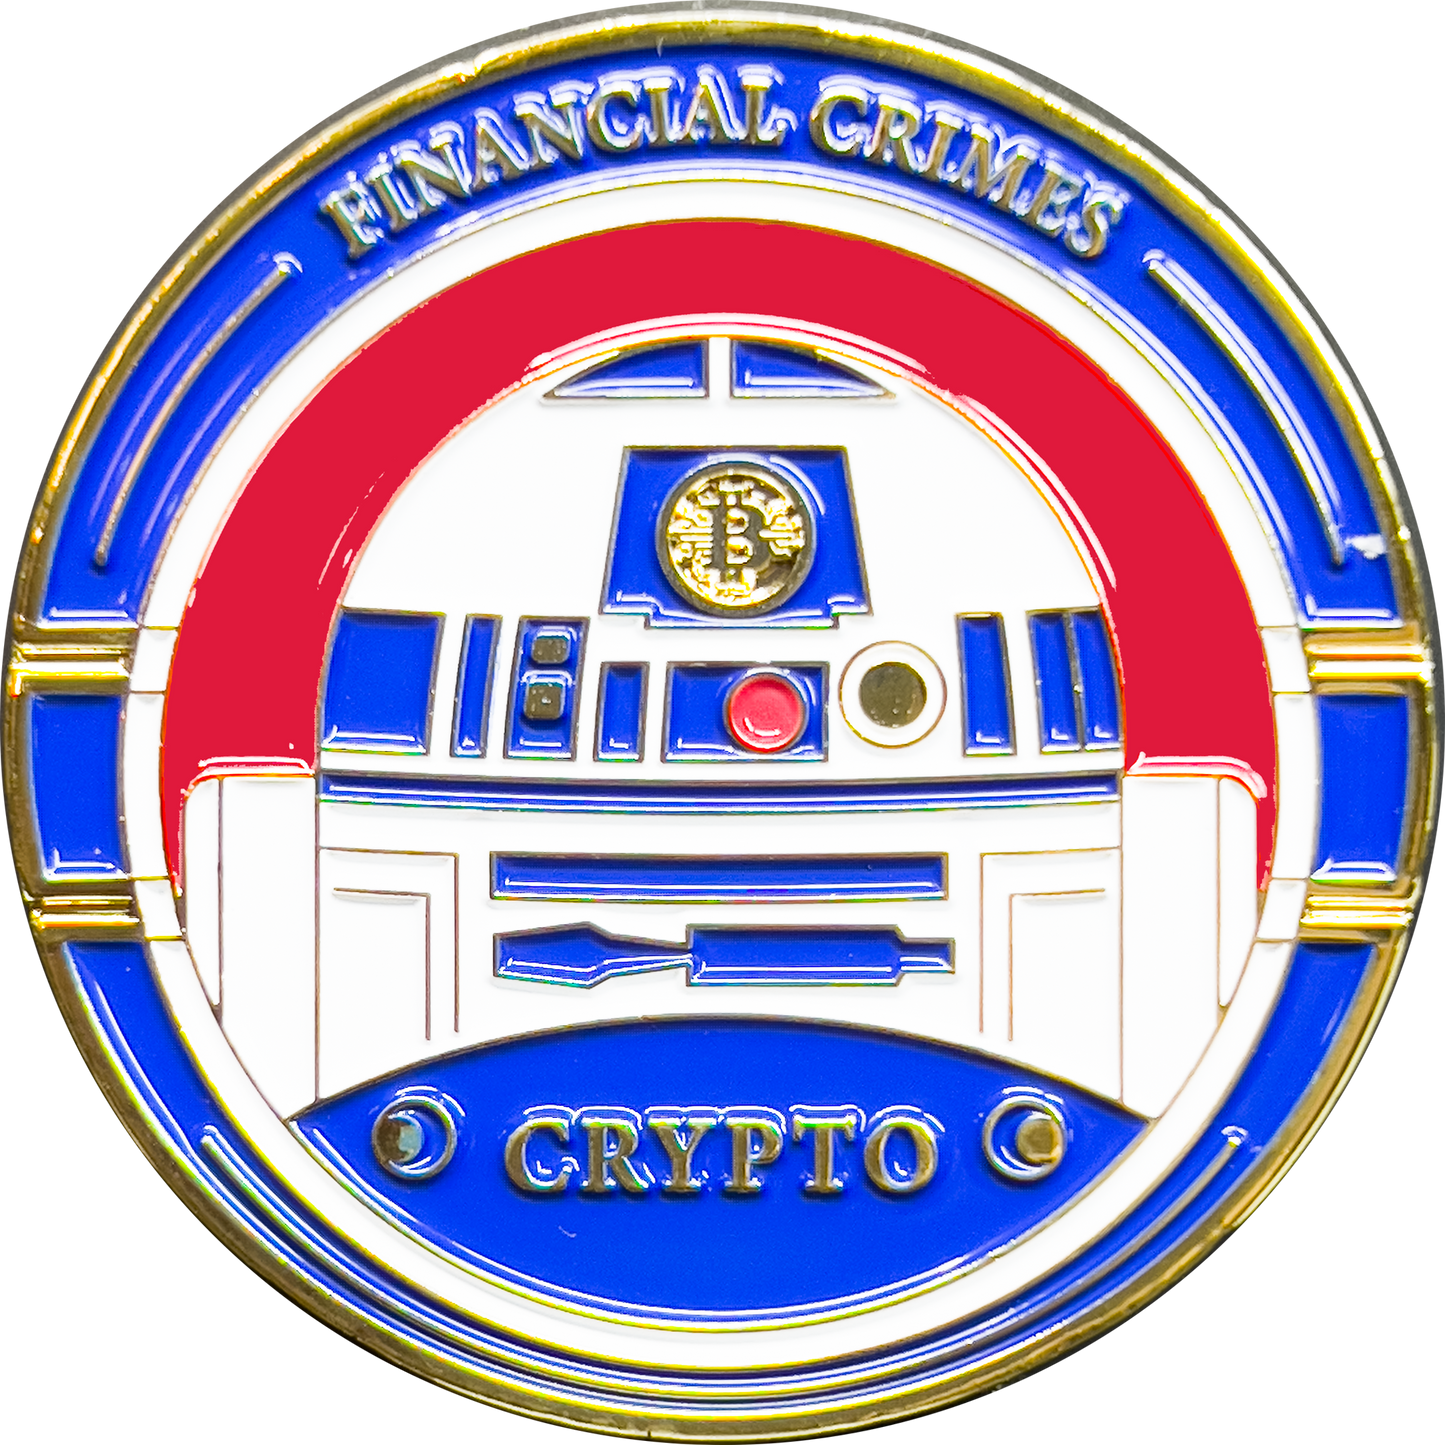 GL10-001 R2-D2 Financial Crimes Task Force Challenge Coin R2D2 HSI DEA FBI ATF NYPD IRS